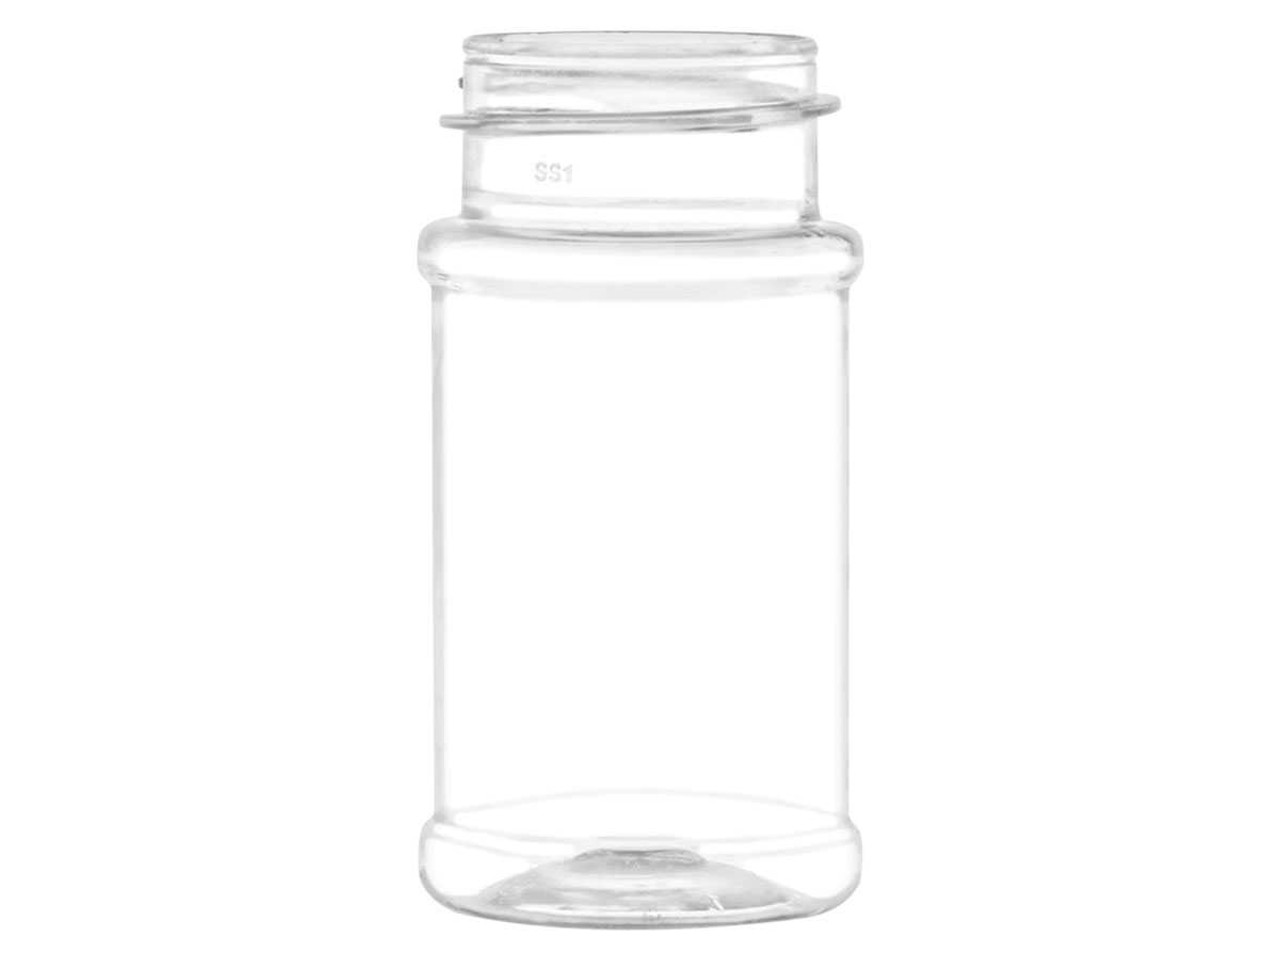 https://cdn11.bigcommerce.com/s-1ybtx/images/stencil/1280x1280/products/1290/6727/20-pcs-4-oz-PET-Plastic-Spice-Jars-with-Shake-and-Pour-Cap-in-your-color-choice-Made-in-USA_4313__63297.1674335935.jpg?c=2?imbypass=on